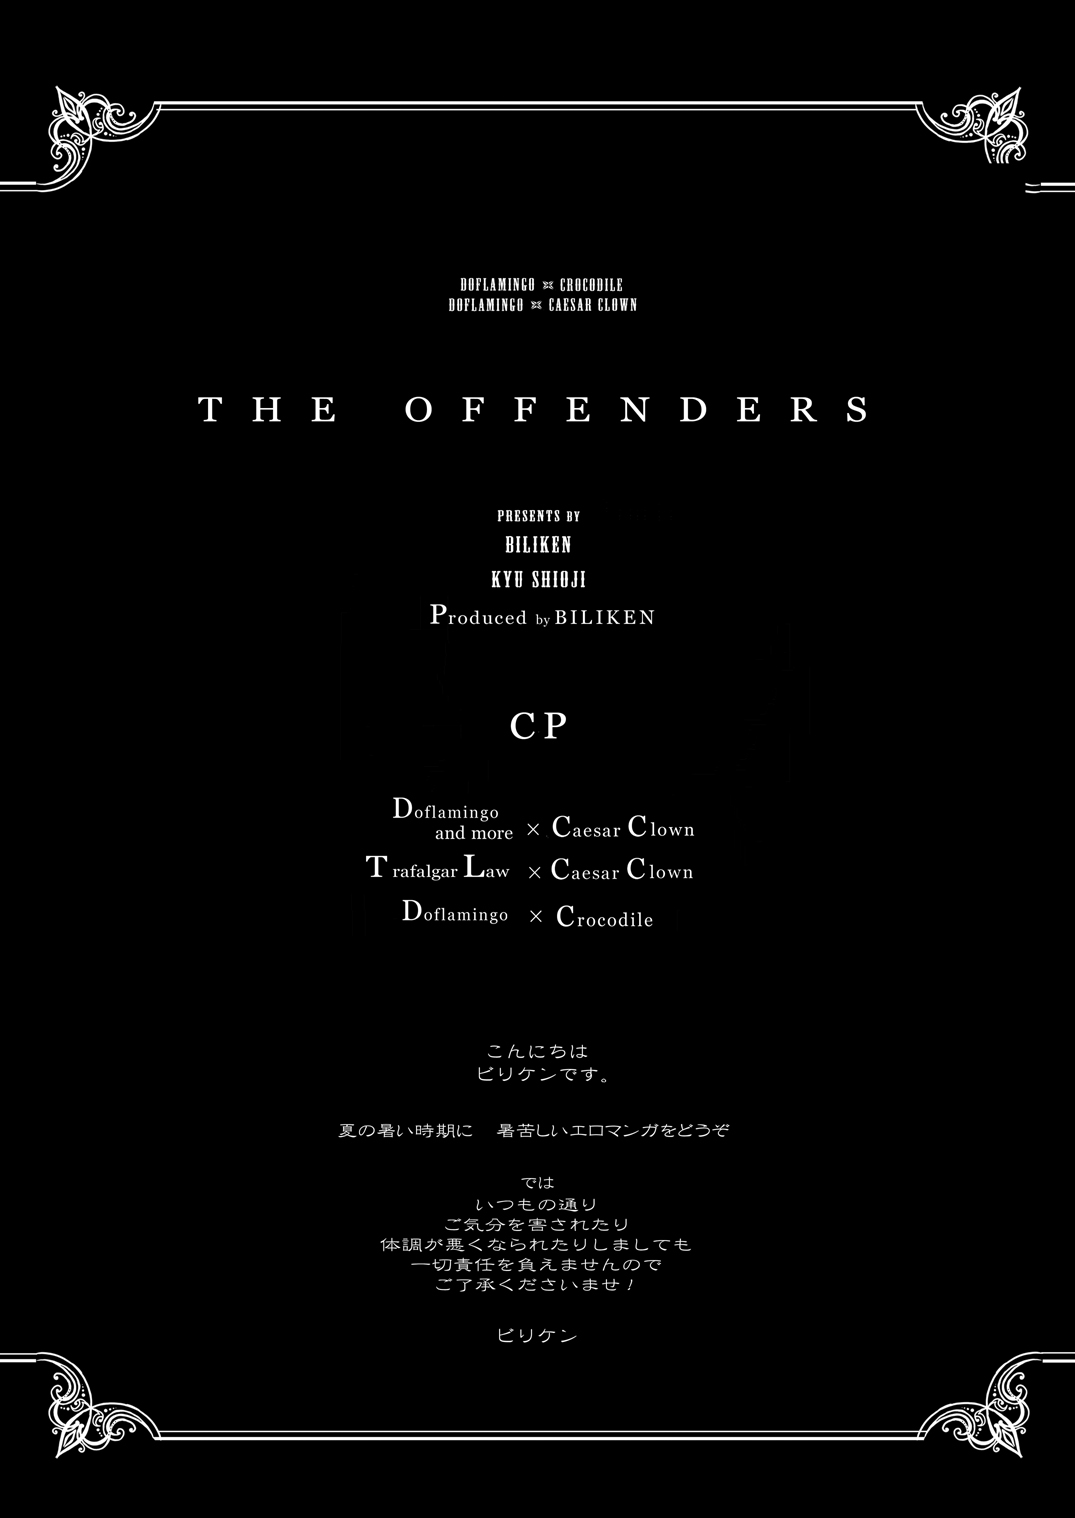 [Biliken (Kyu Shioji)] THE OFFENDERS (One Piece) [English] {Magnet Dance} [ビリケン (キュー紫緒路)] THE OFFENDERS (ワンピース) [英訳]